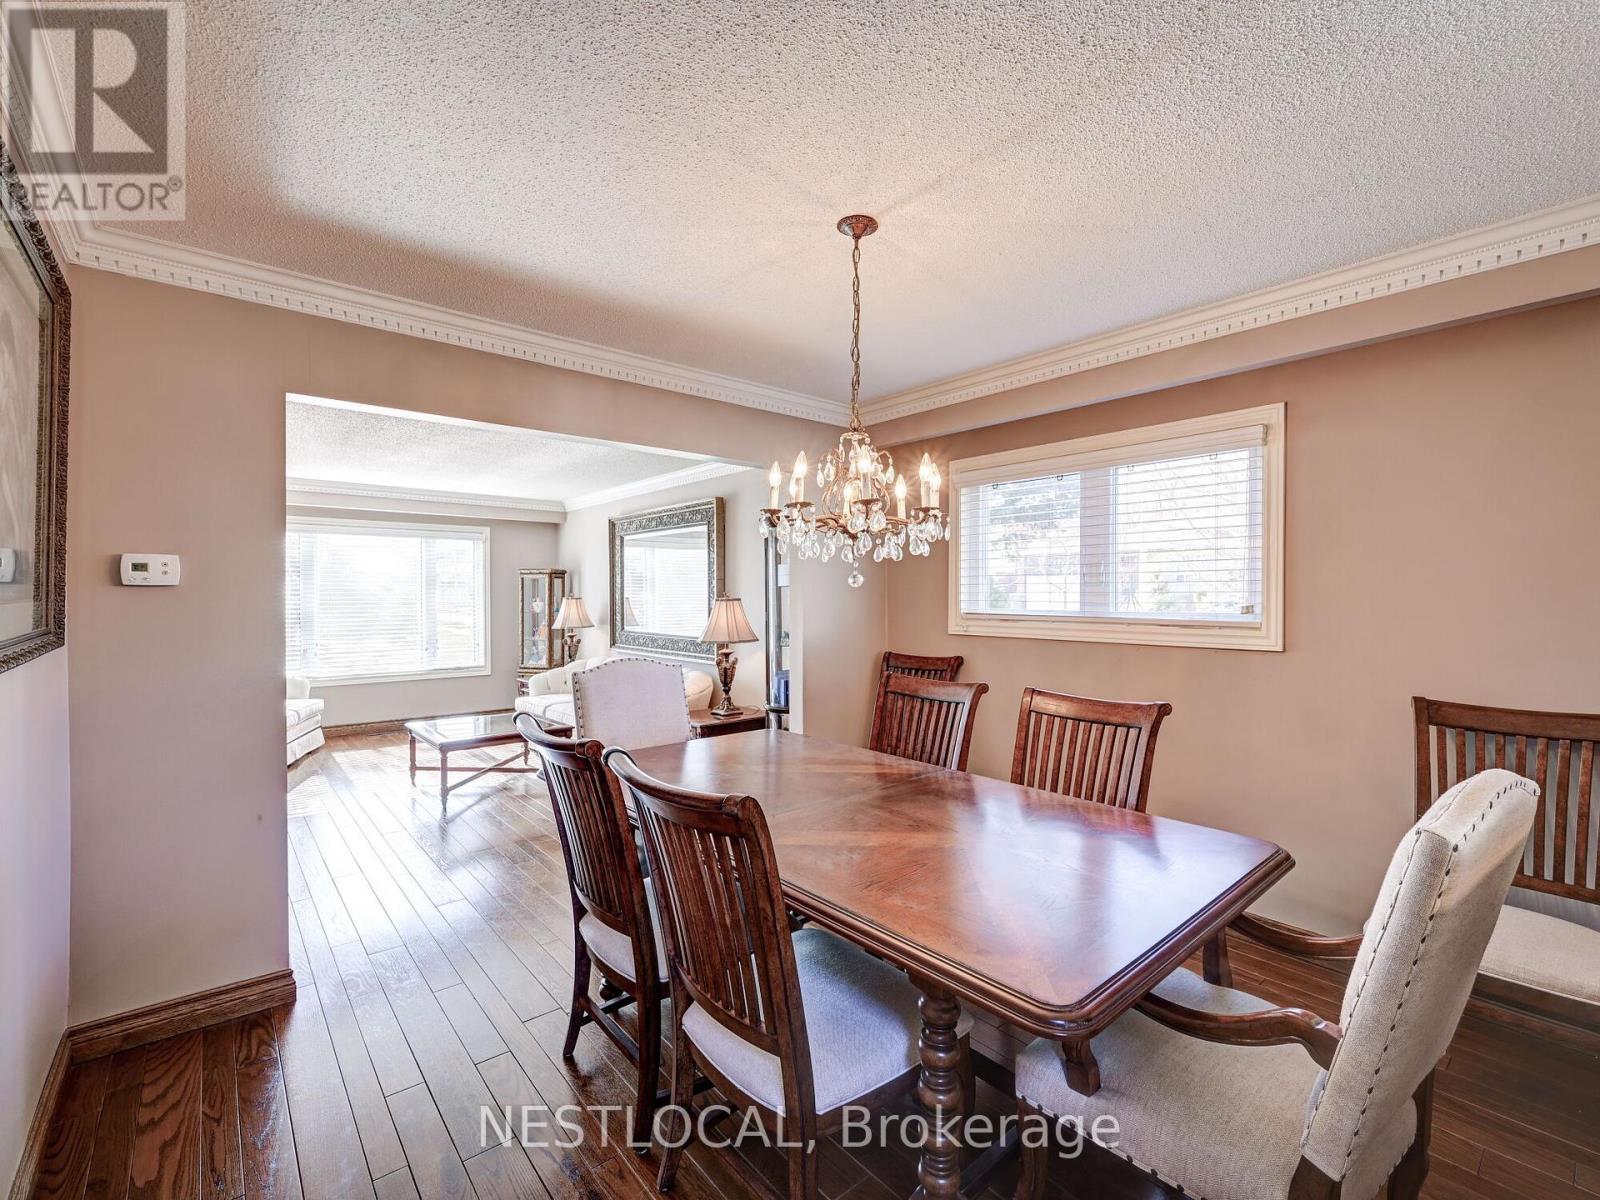 For Sale in Mississauga - 2577 Palisander Avenue, Mississauga, Ontario  L5B 2L1 - Photo 6 - W8137262